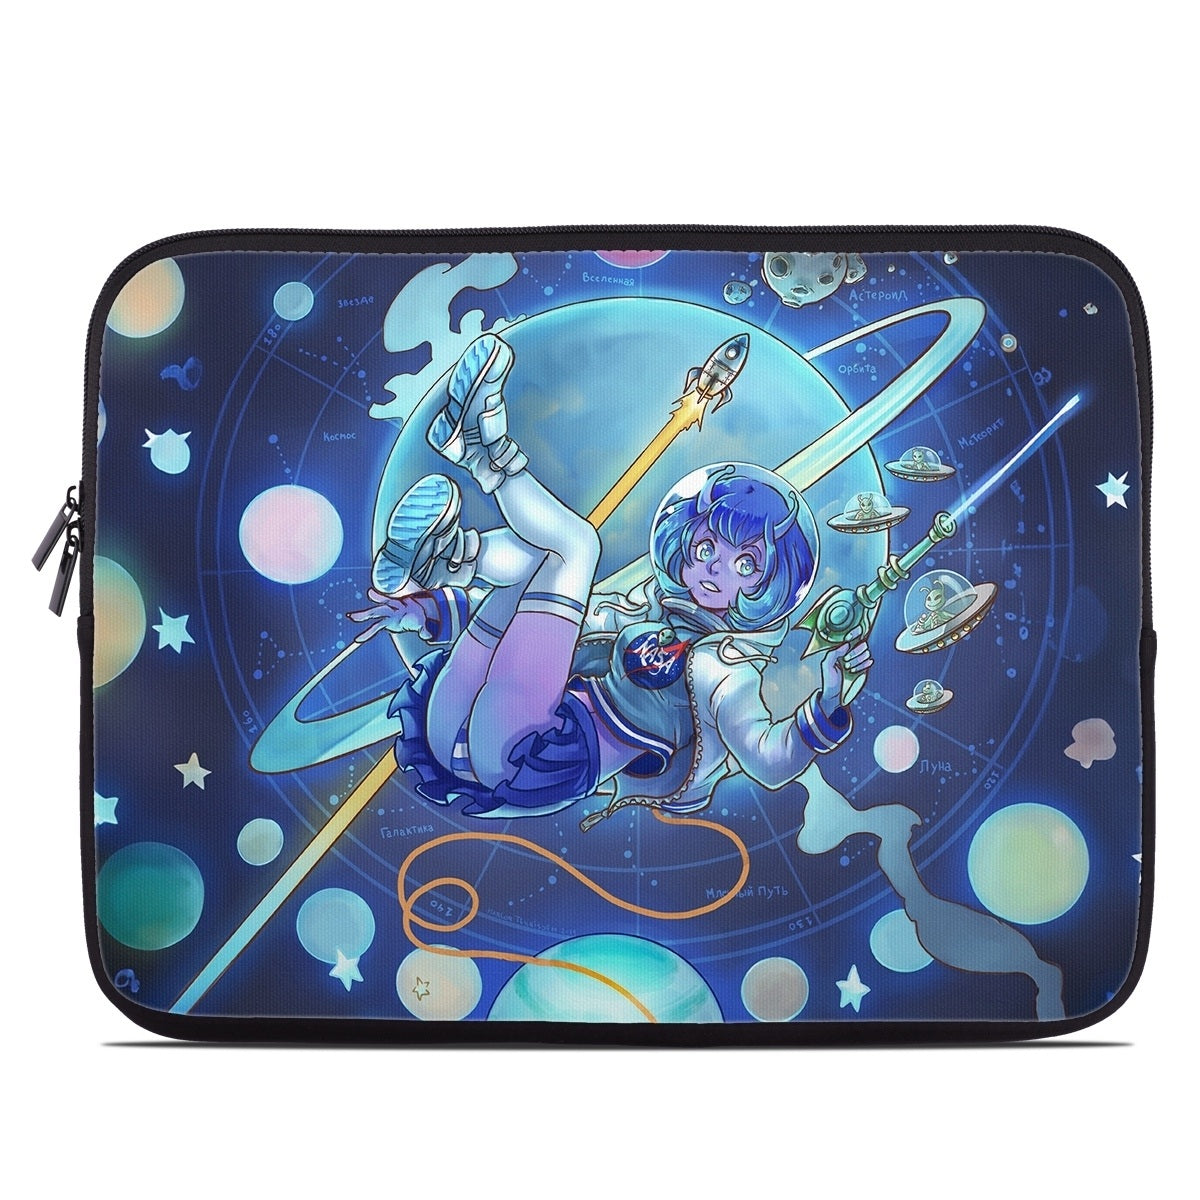 We Come in Peace - Laptop Sleeve